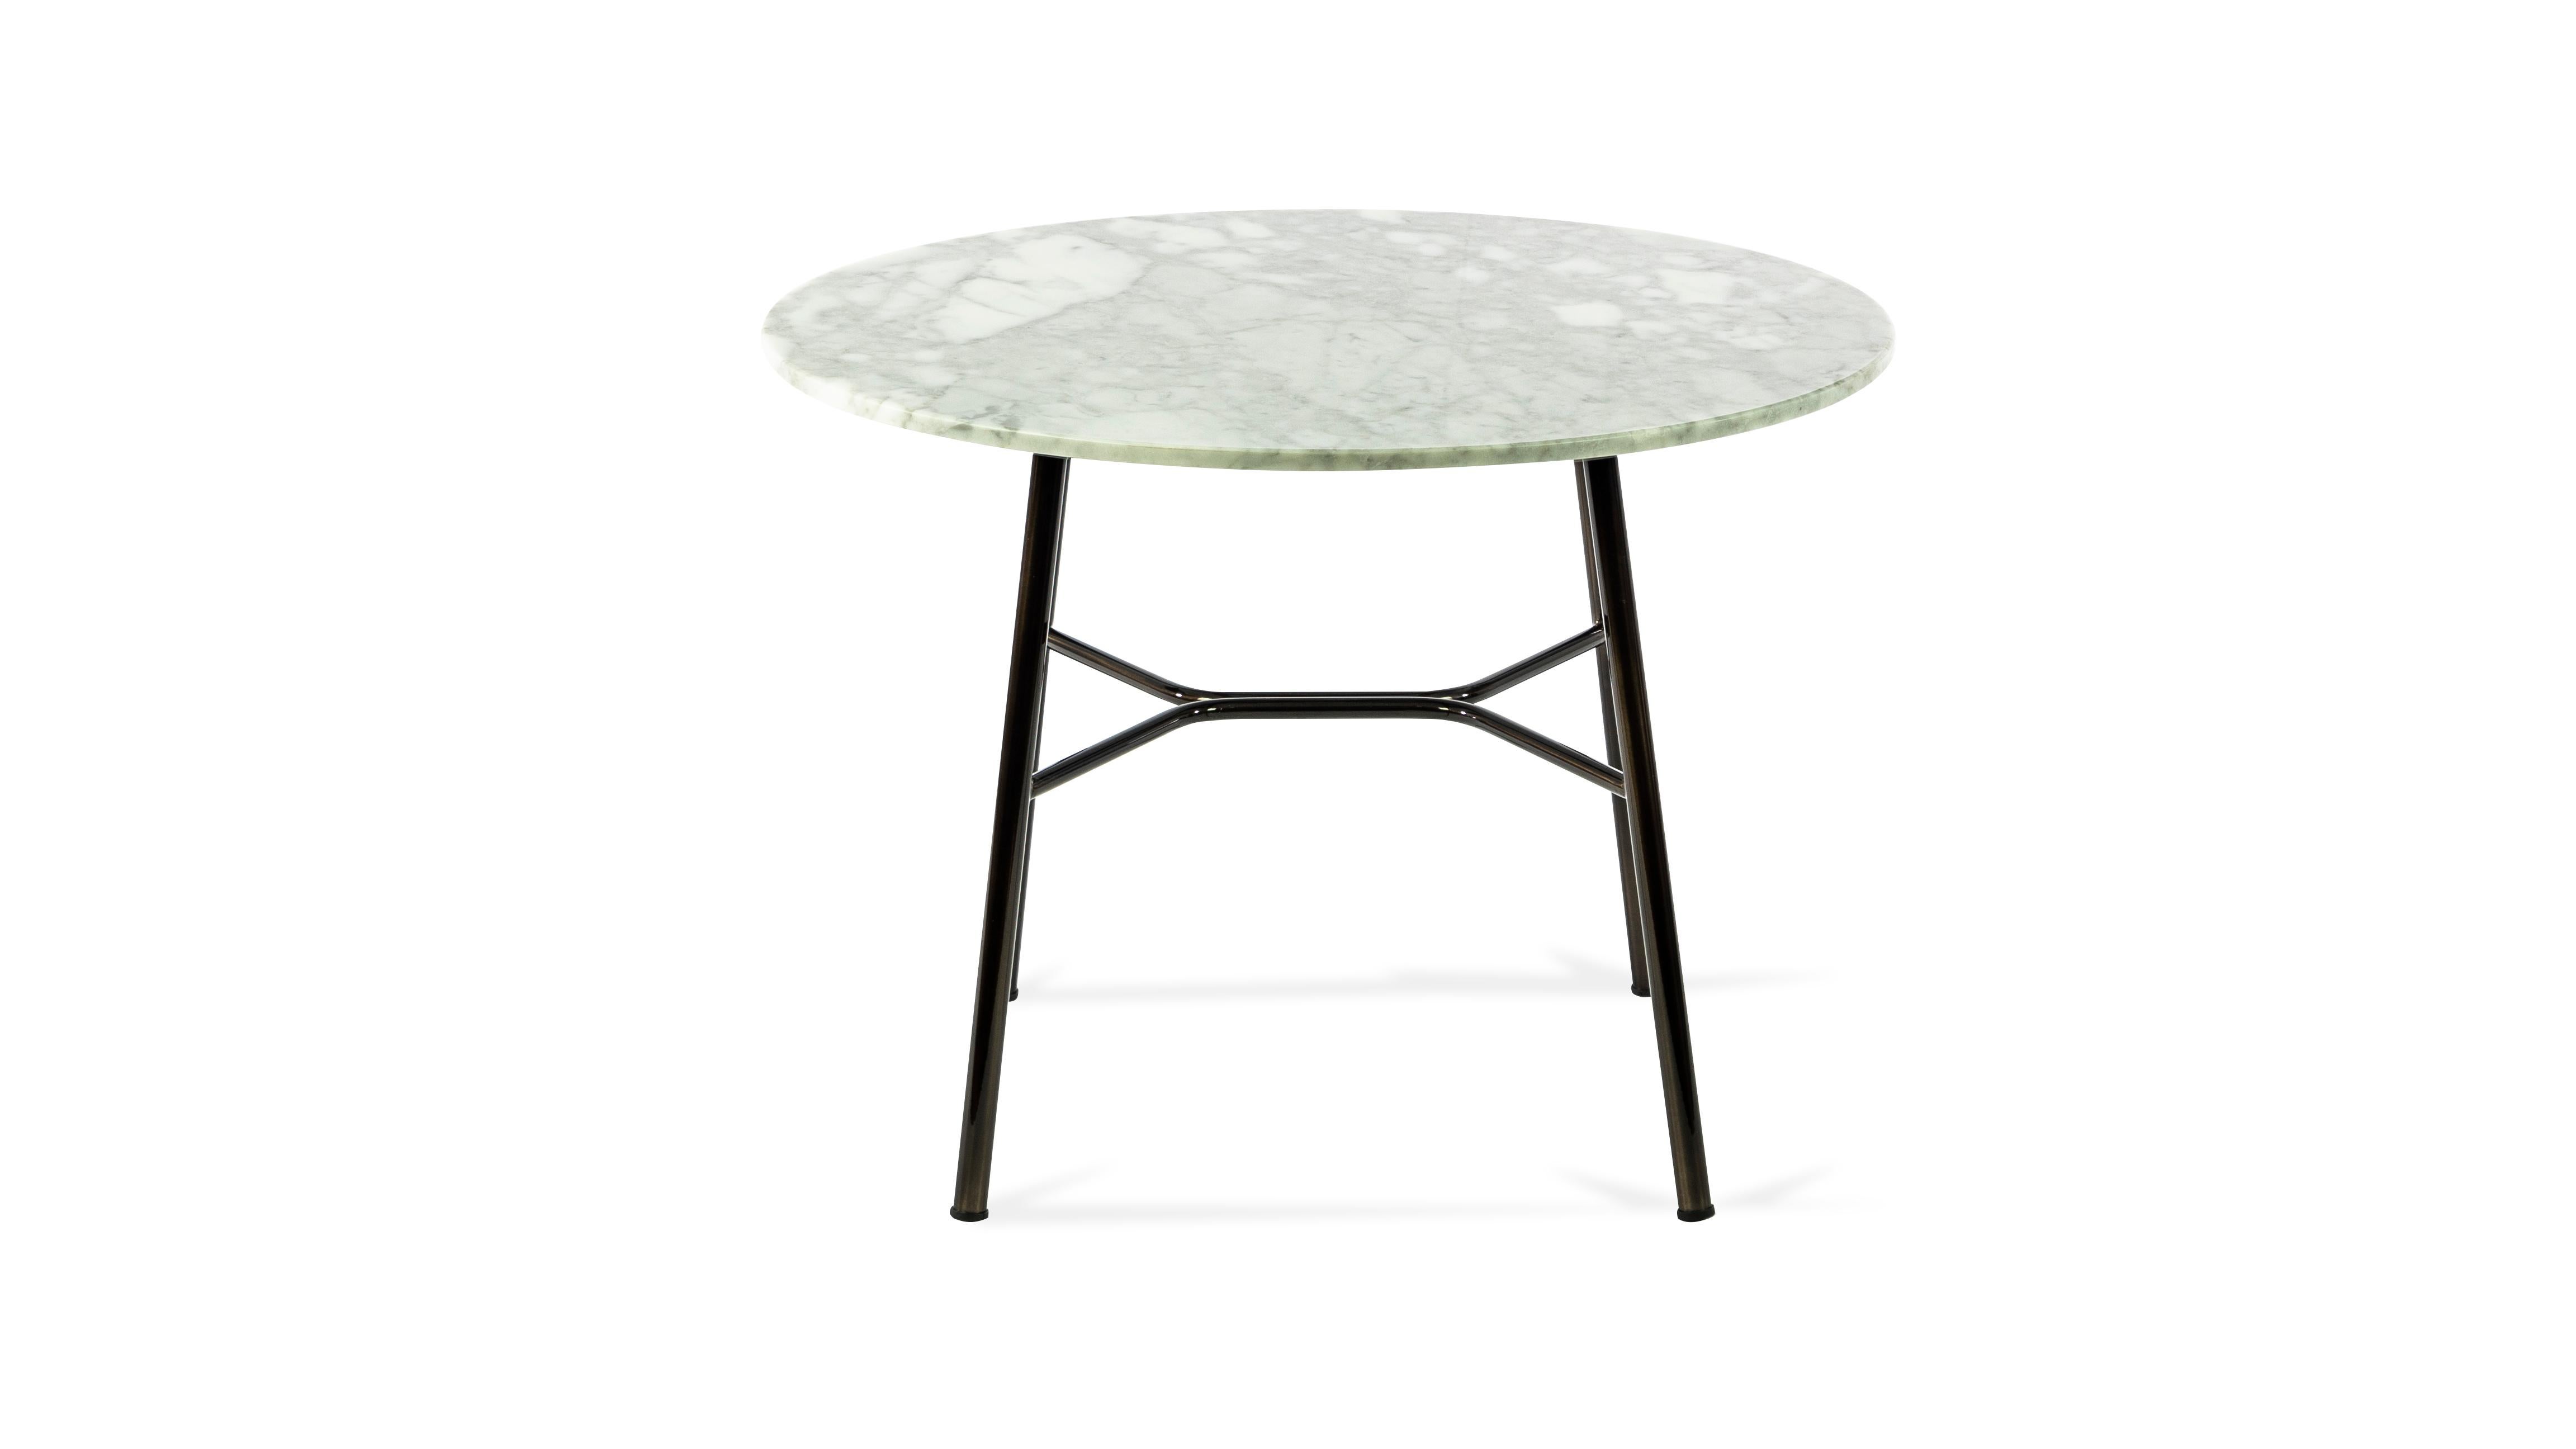 Coffee table, with metal frame, painted in standard or special colors, top available in glass ceramic color white Calacatta marble diameter 50 cm. height 45
It fits perfectly in a hotel lounge or home environment.